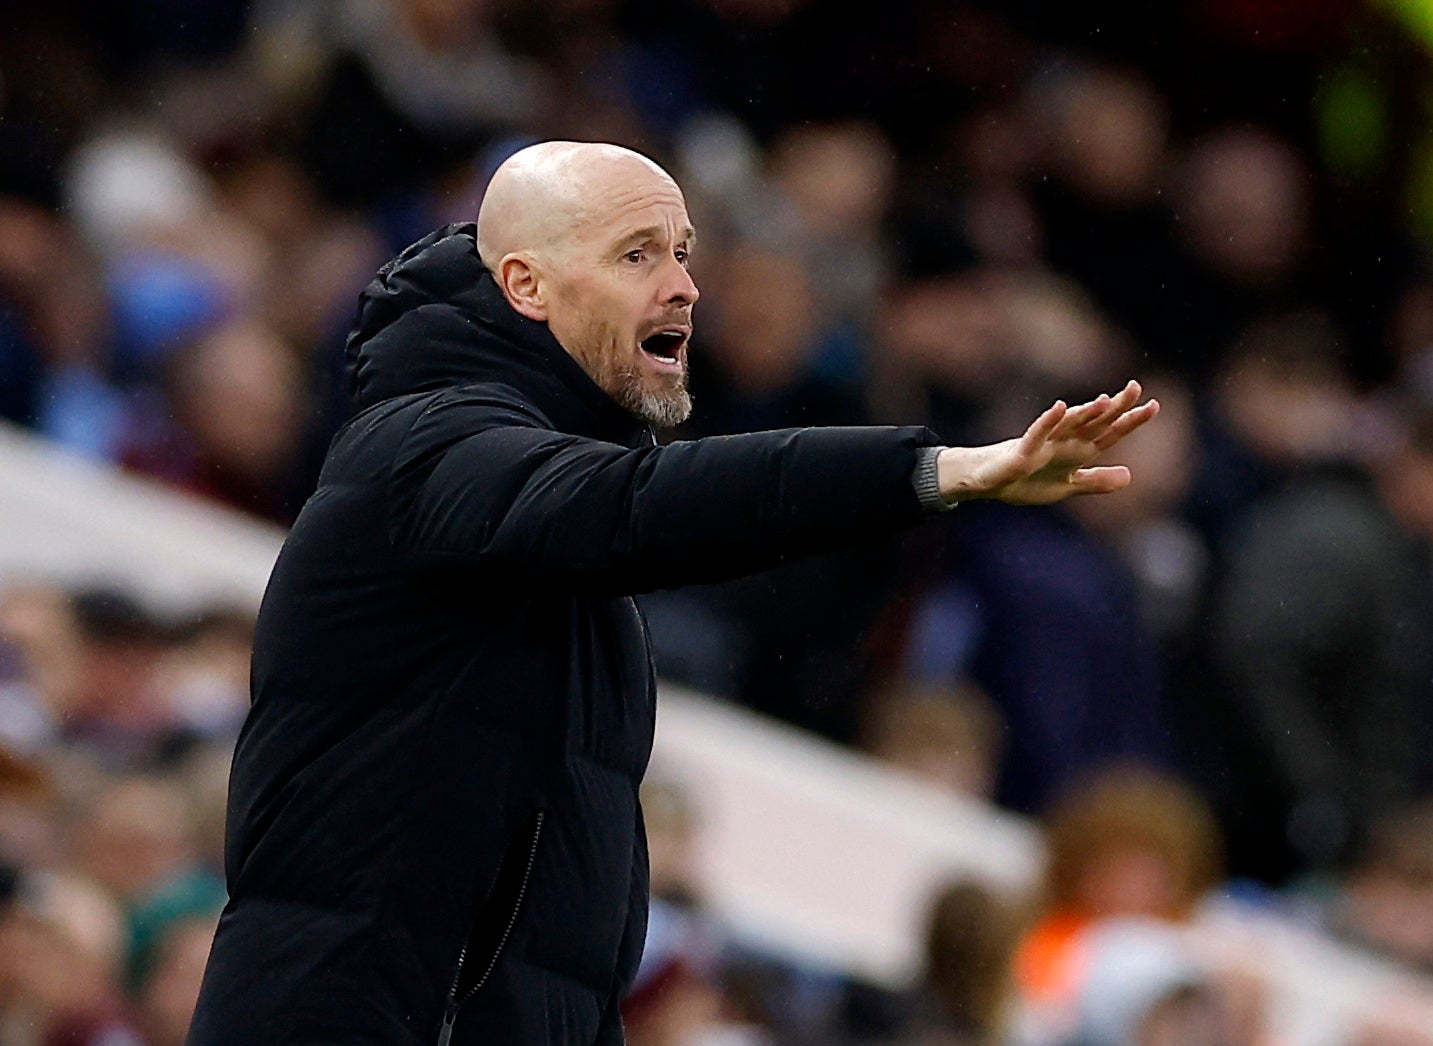 Ten Hag’s side now have momentum in the race for the Champions League places